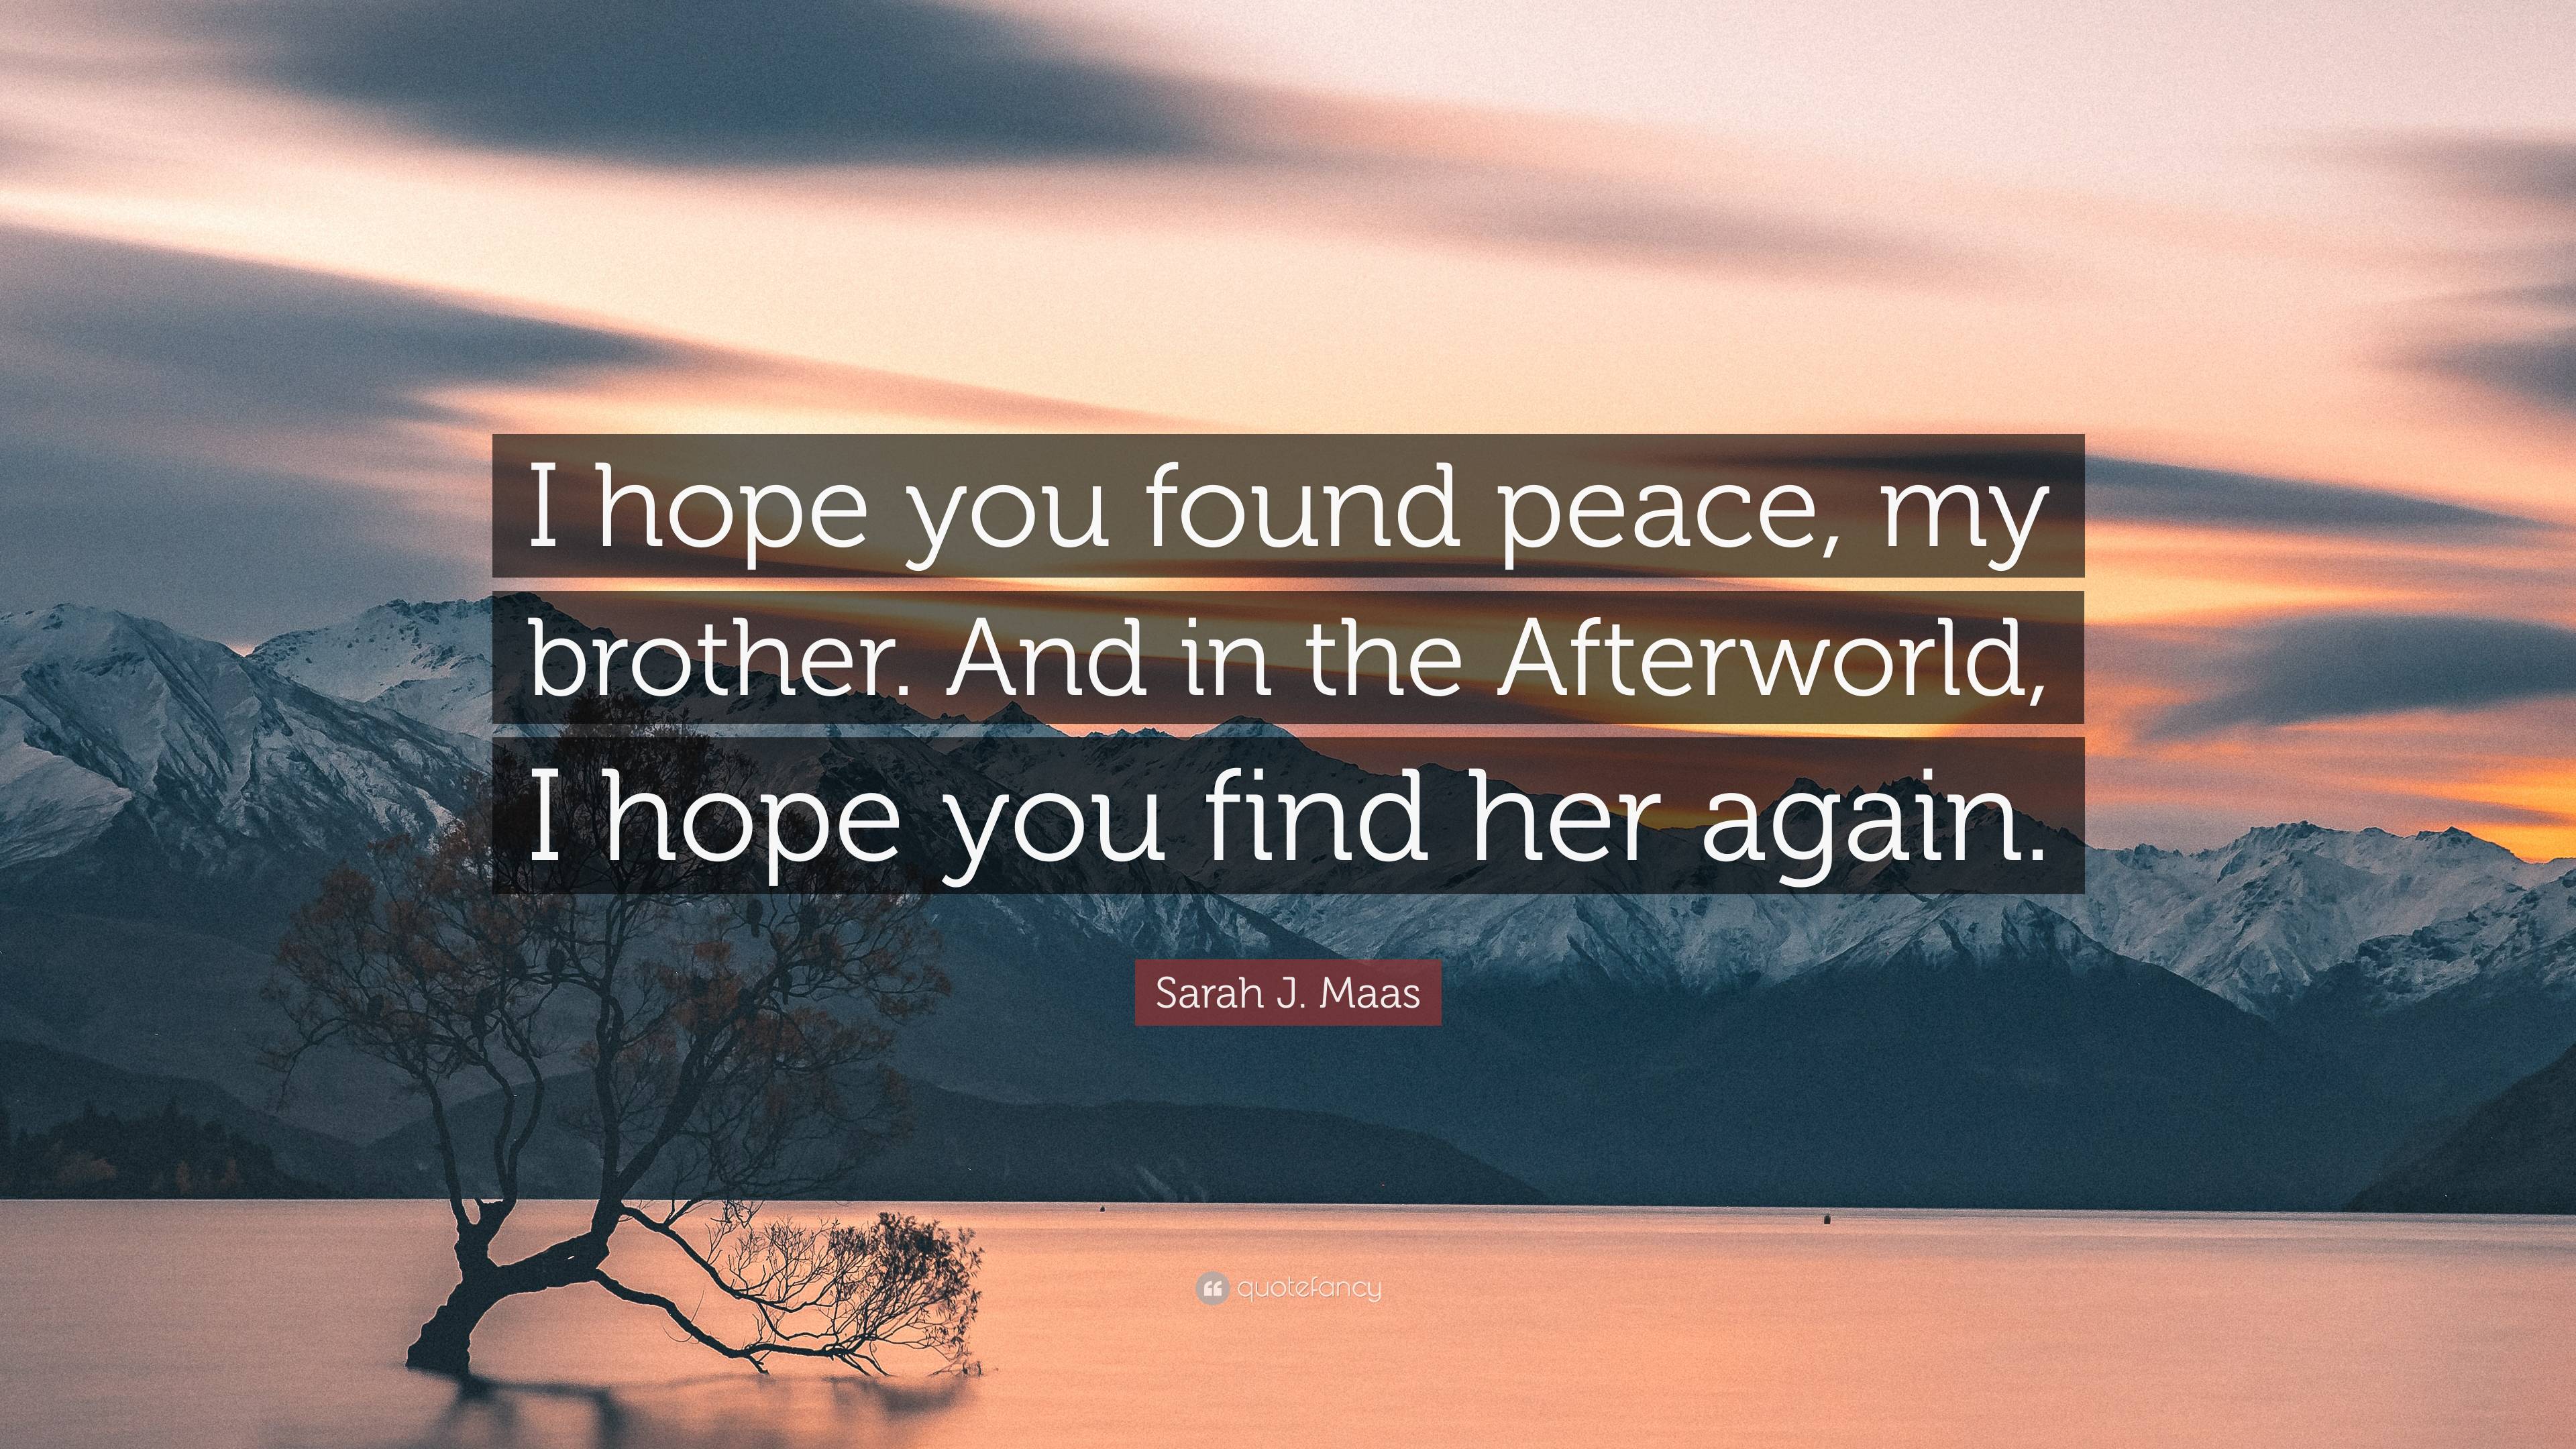 Sarah j maas quote âi hope you found peace my brother and in the afterworld i